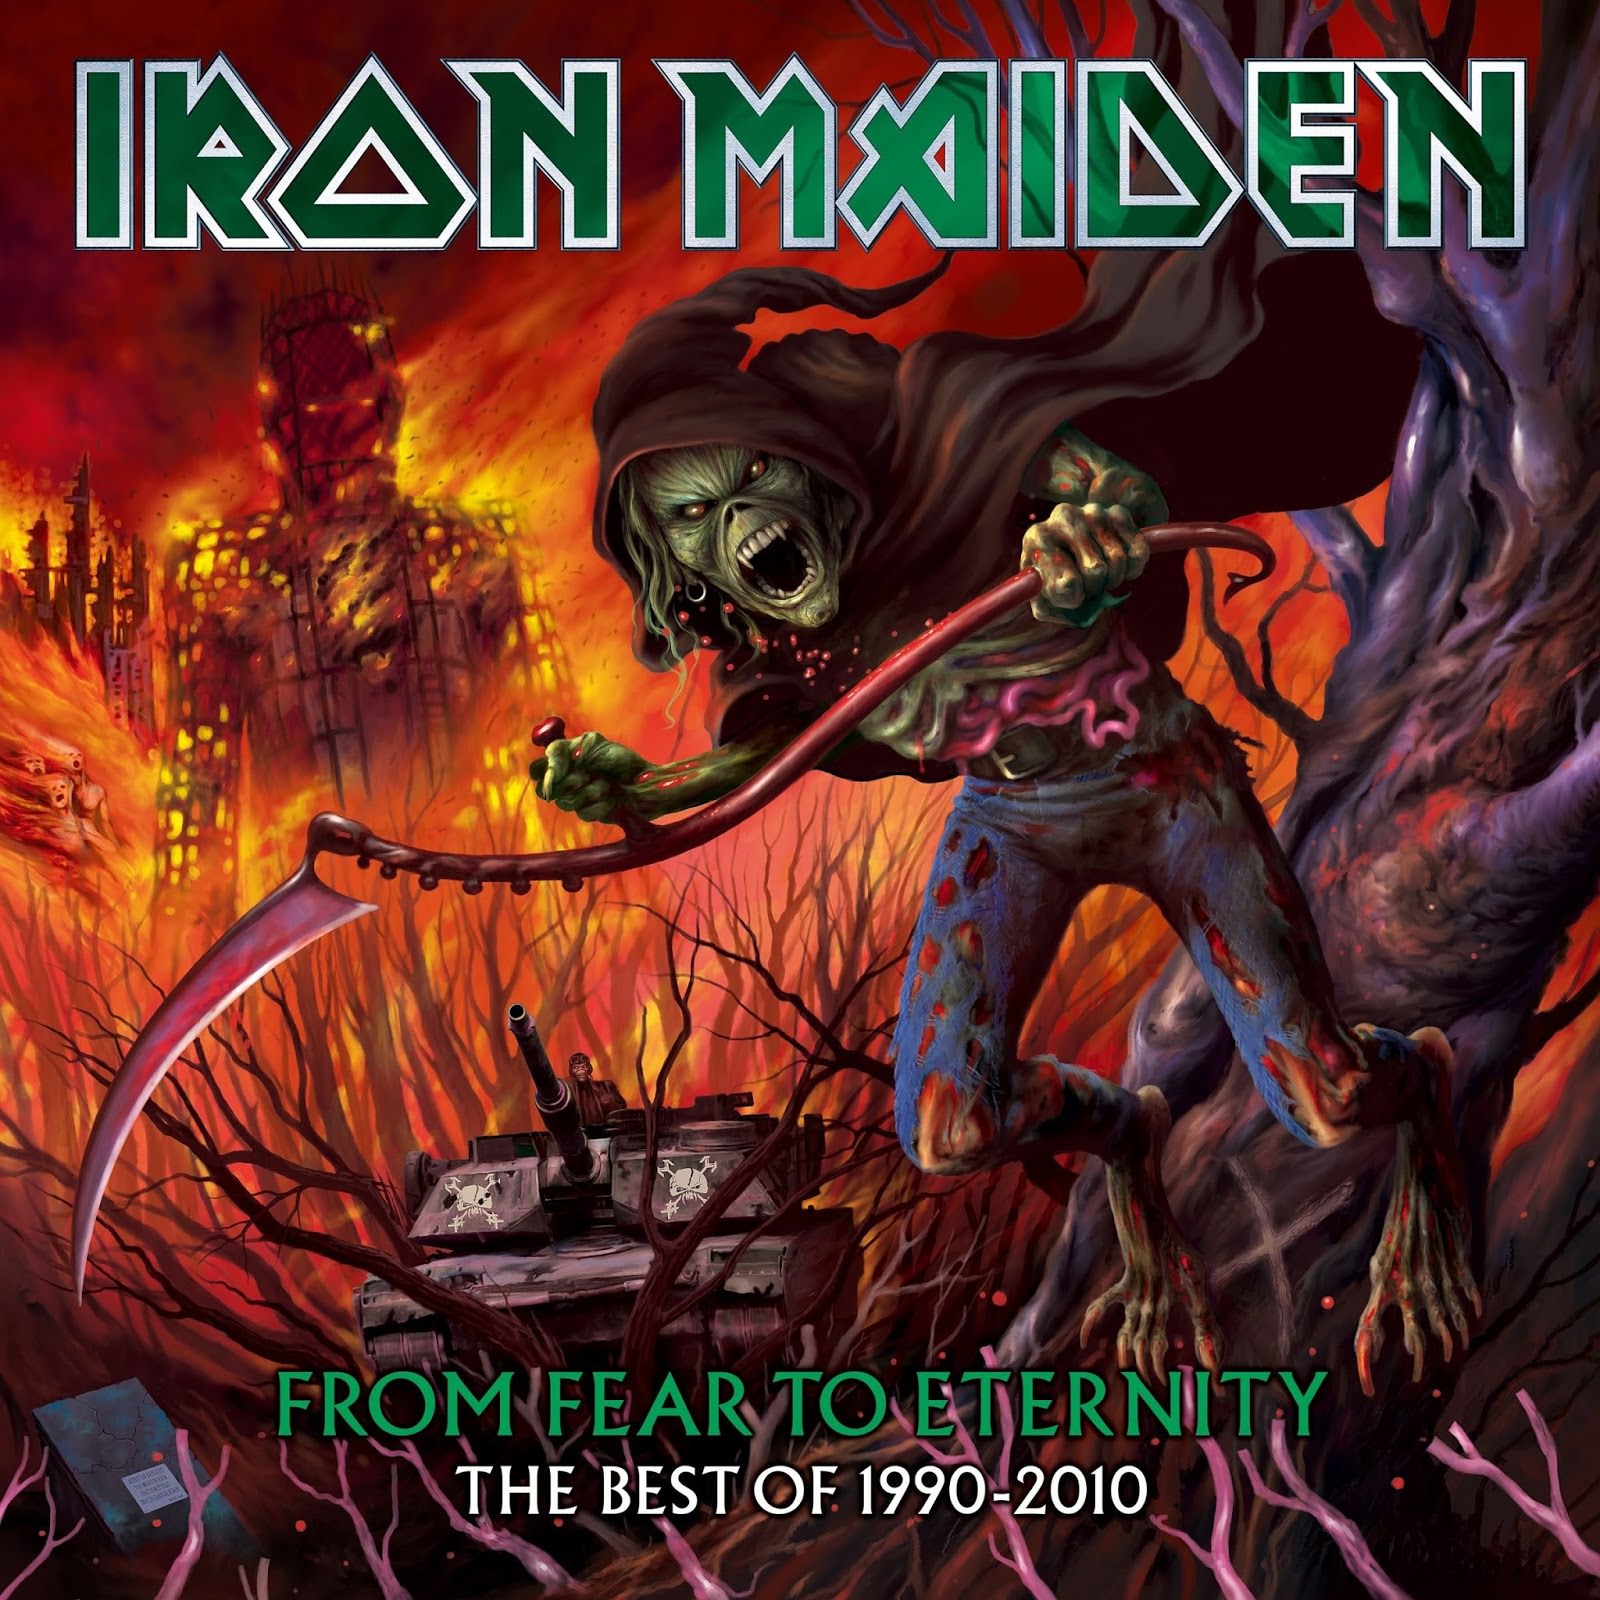 Iron Maiden - From Fear To Eternity: The Best Of 1990-2010 (2011/2015) [Qobuz FLAC 24bit/48kHz]